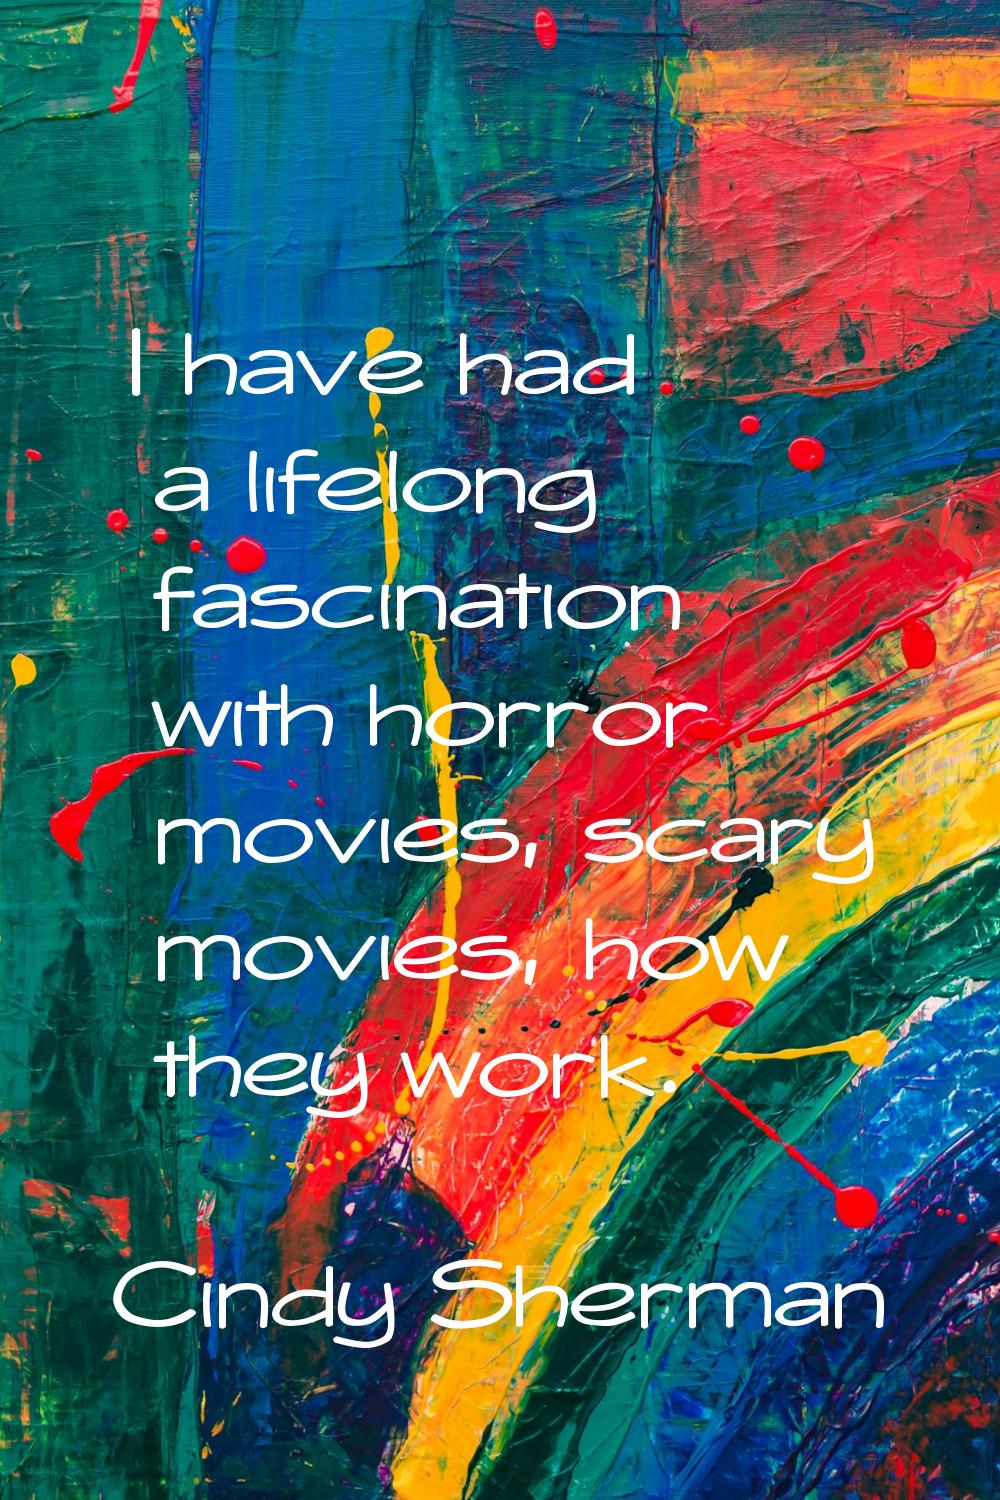 I have had a lifelong fascination with horror movies, scary movies, how they work.